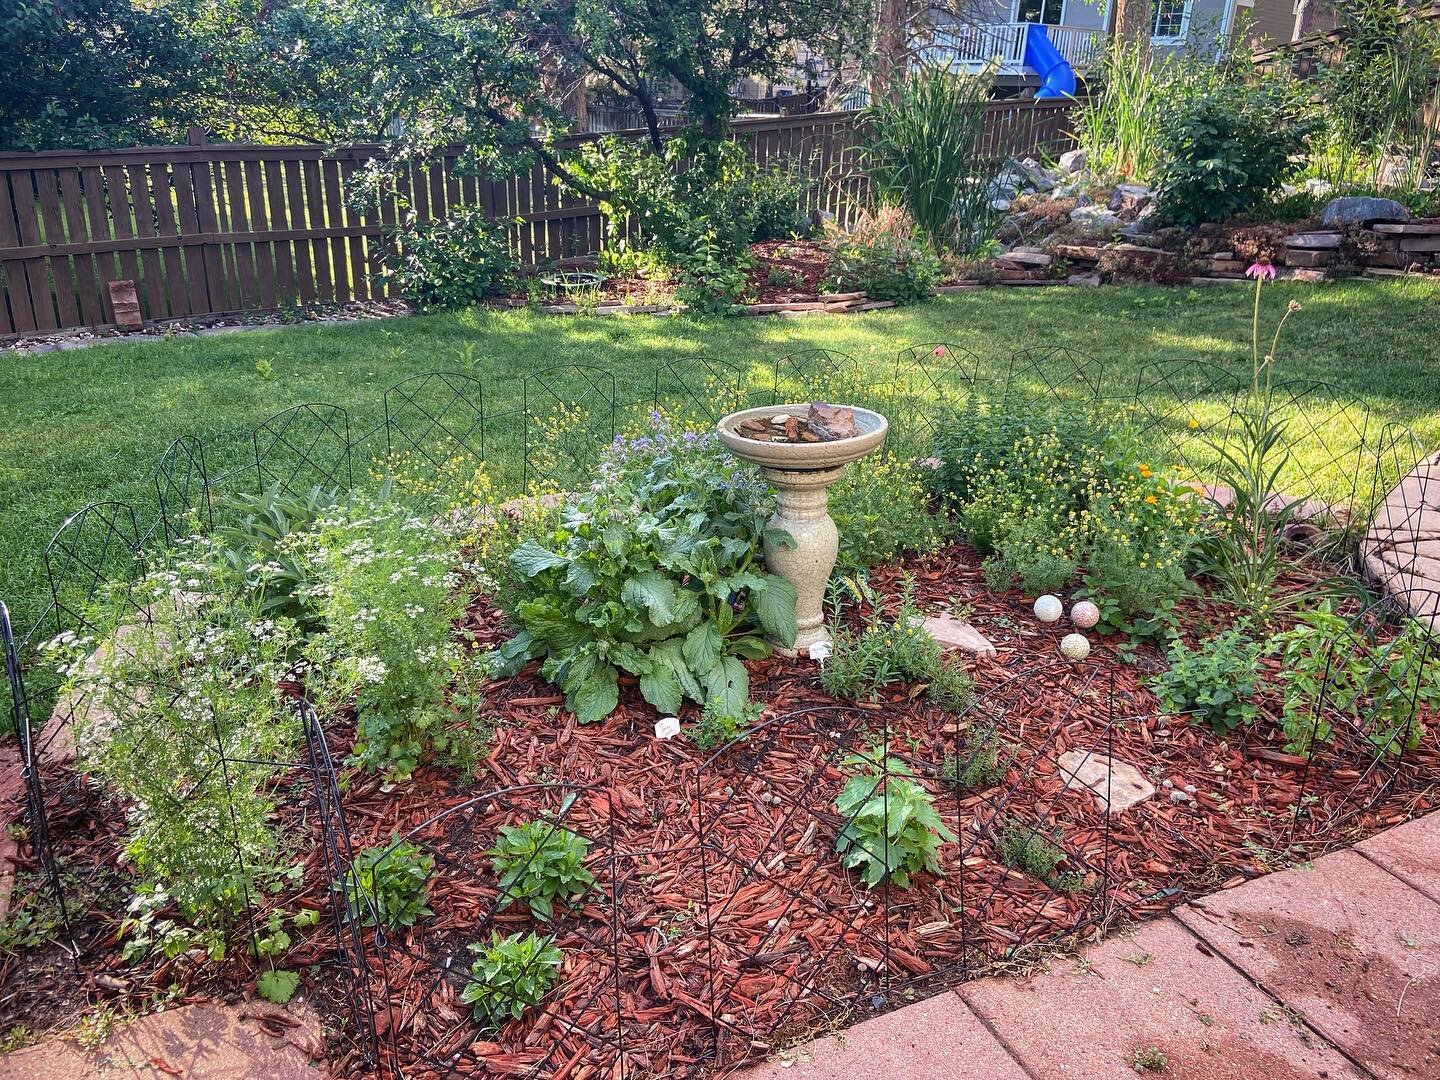 What does this picture look like to you? A backyard? ⁣
⁣
If you said that, you are right! ⁣
⁣
This is indeed my backyard. And this little garden here is one of my favorite things on this planet. This is my garden that I dedicated to herbs and medicin